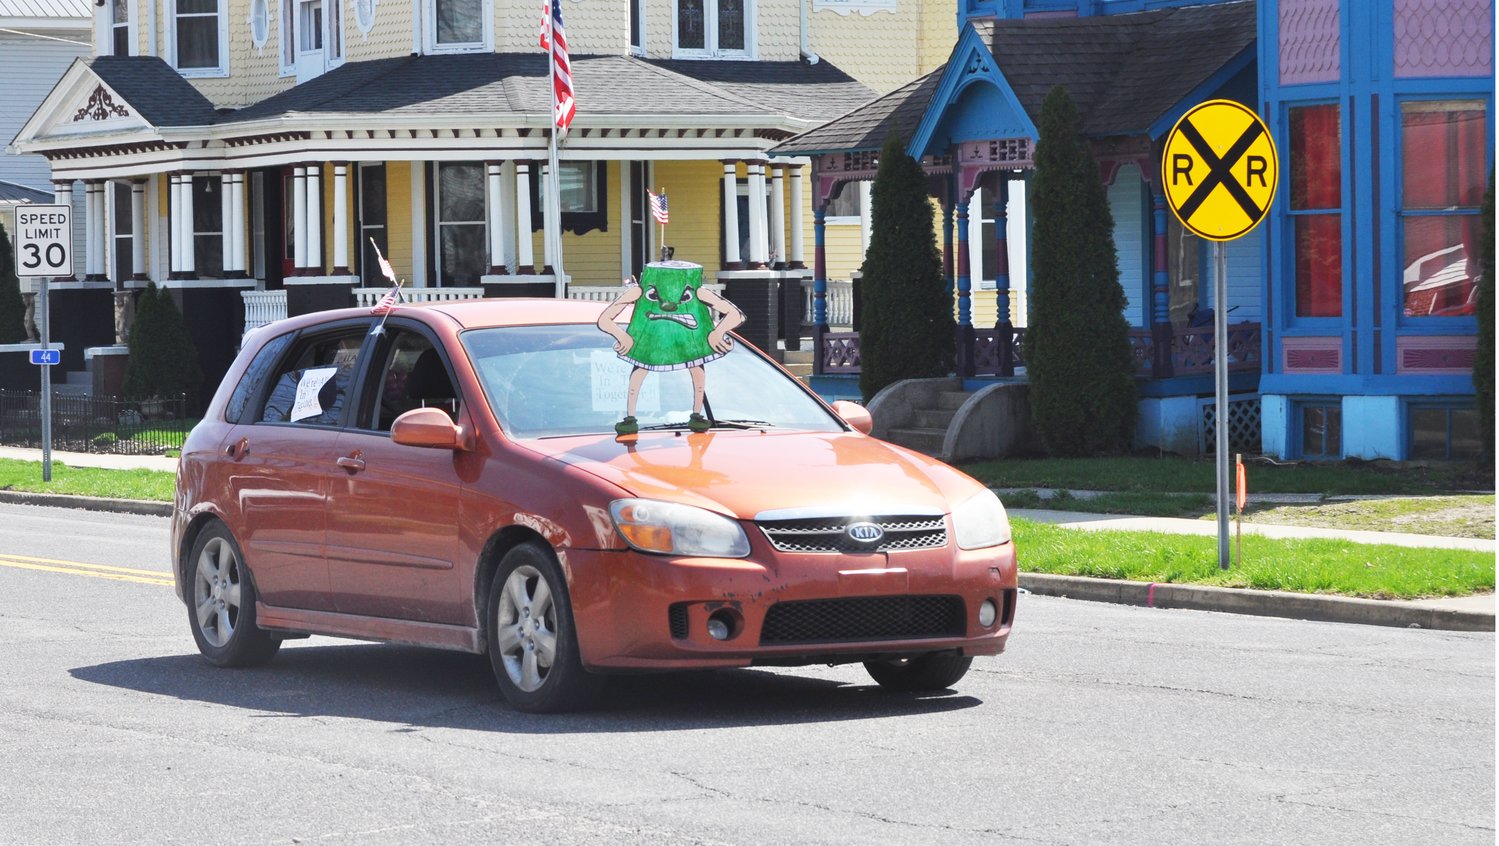 A Canner, the mascot of Ladoga Elementary School, is displayed on a vehicle in the Mountie March Thursday in downtown Ladoga.